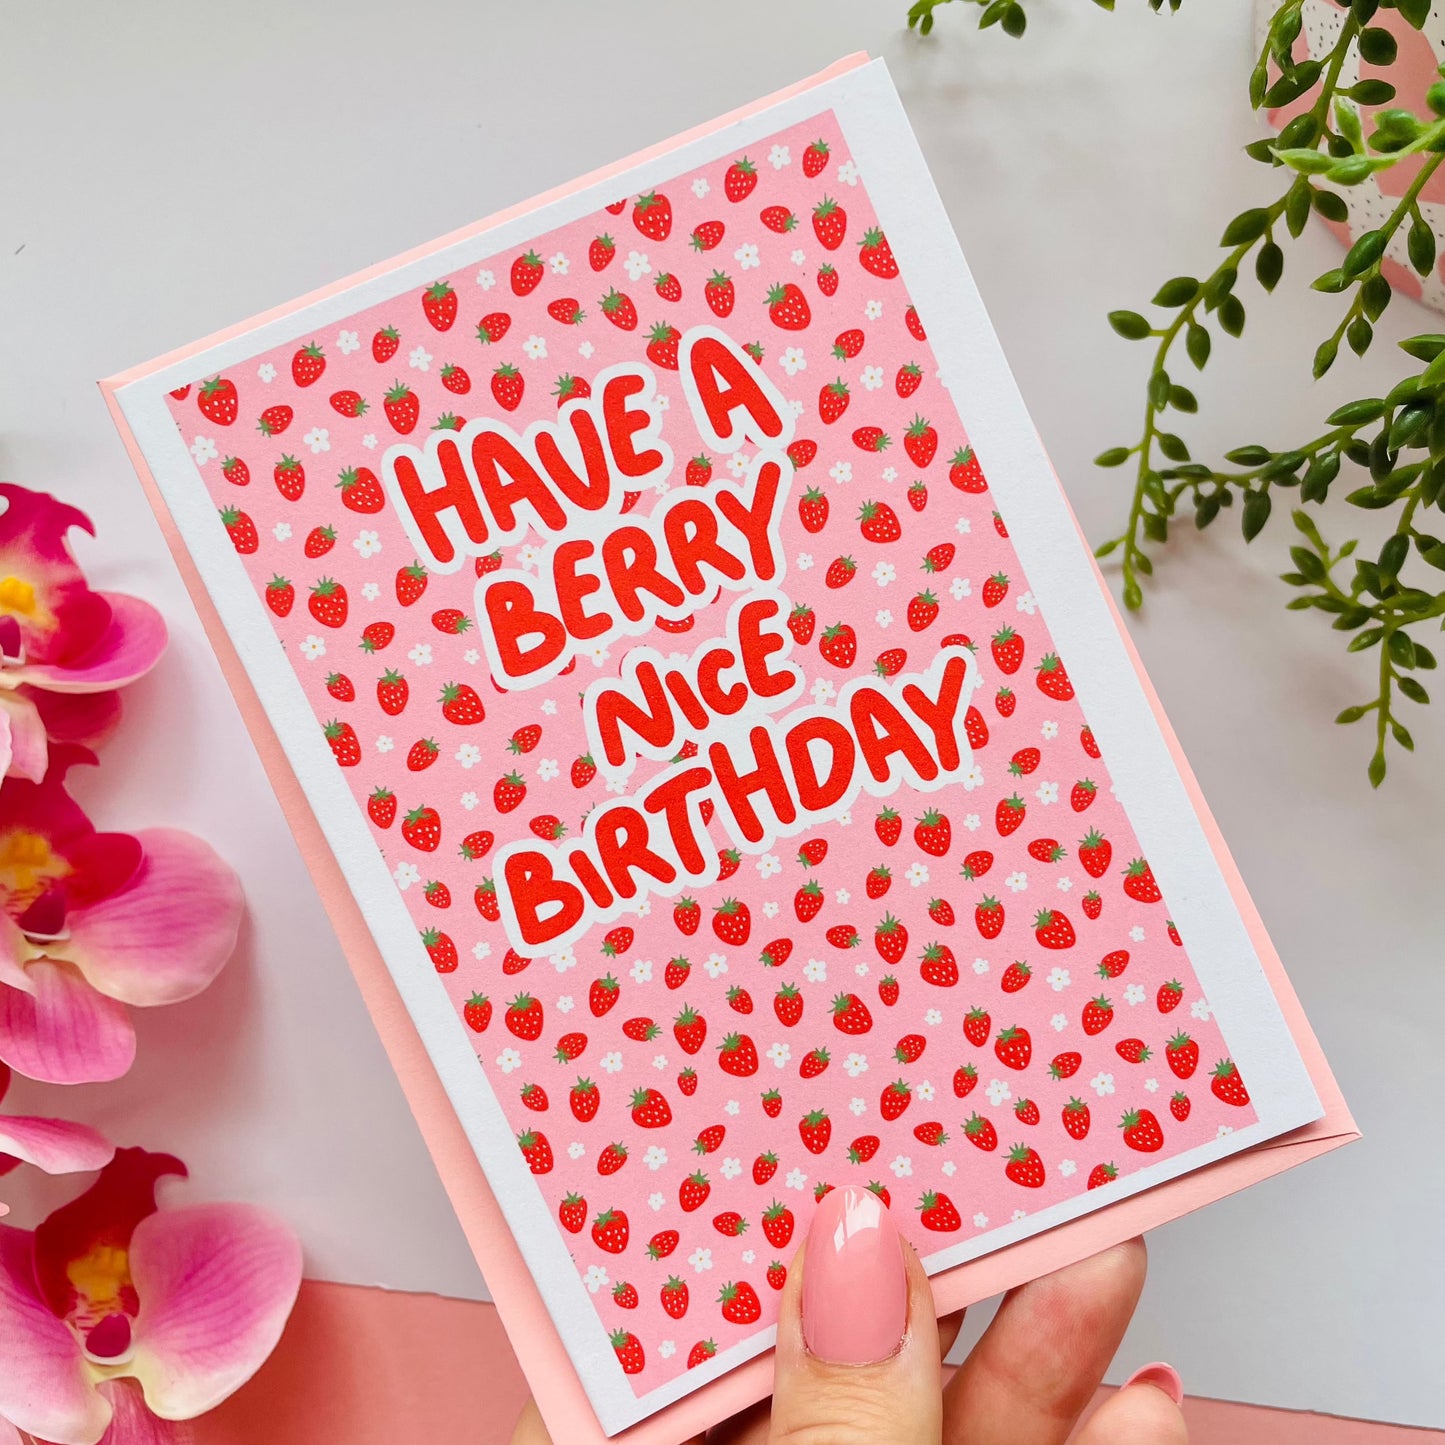 Have A Berry Nice Birthday A6 Greetings Card